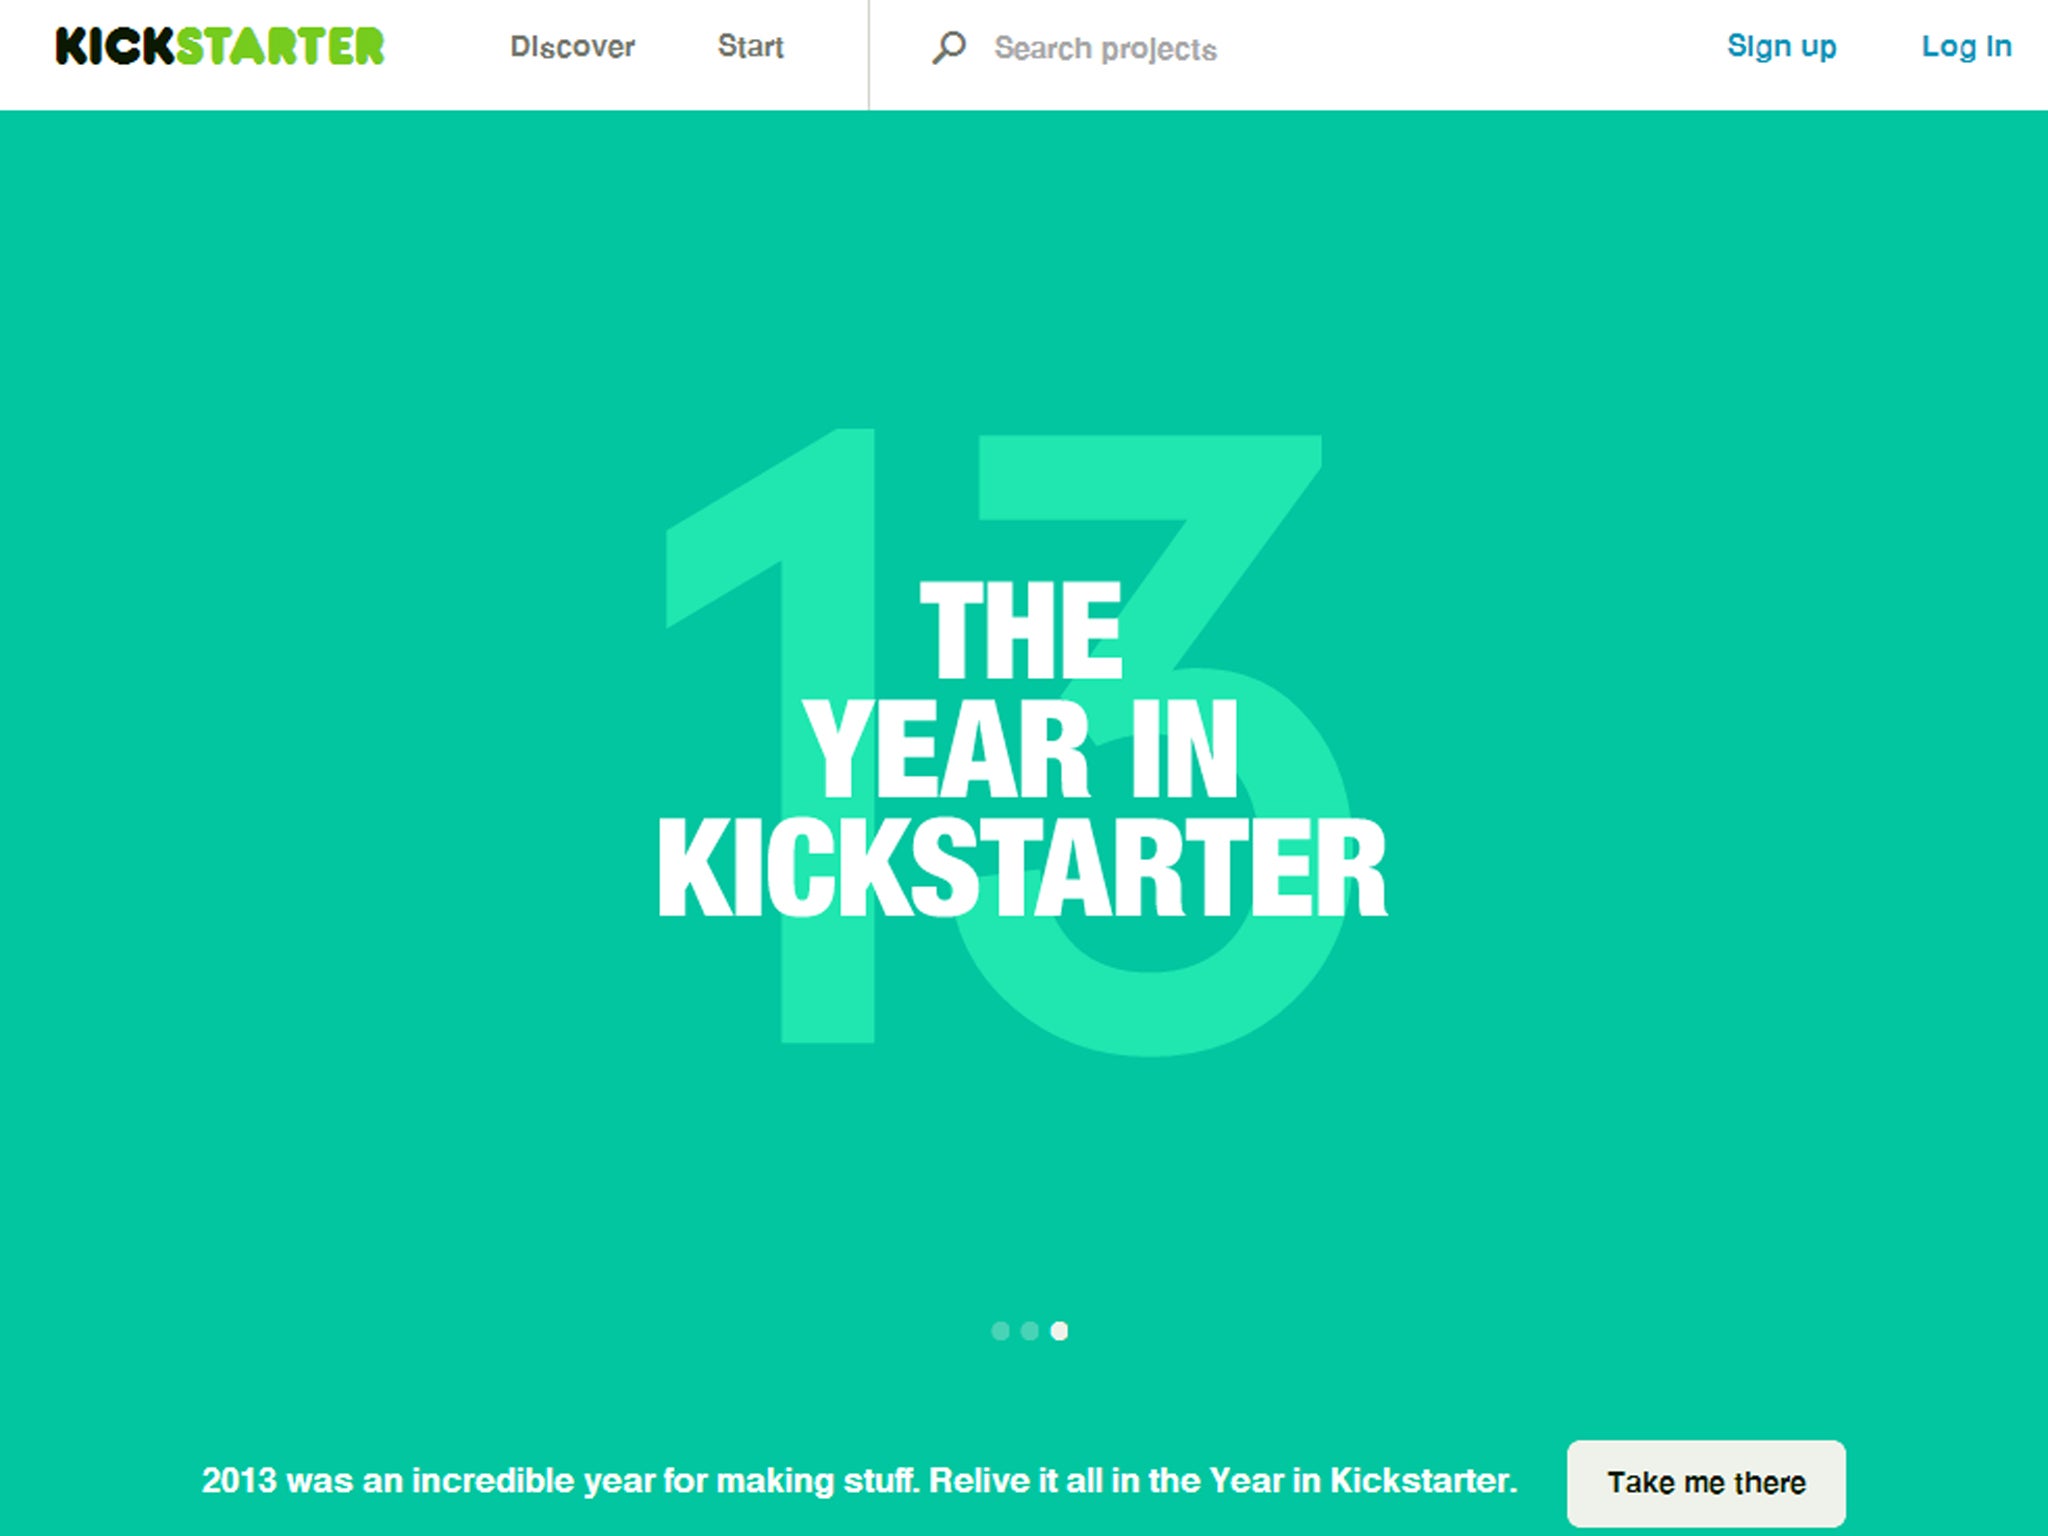 Launched in 2009, over 100,000 projects have since been financed through the crowdfunding platform